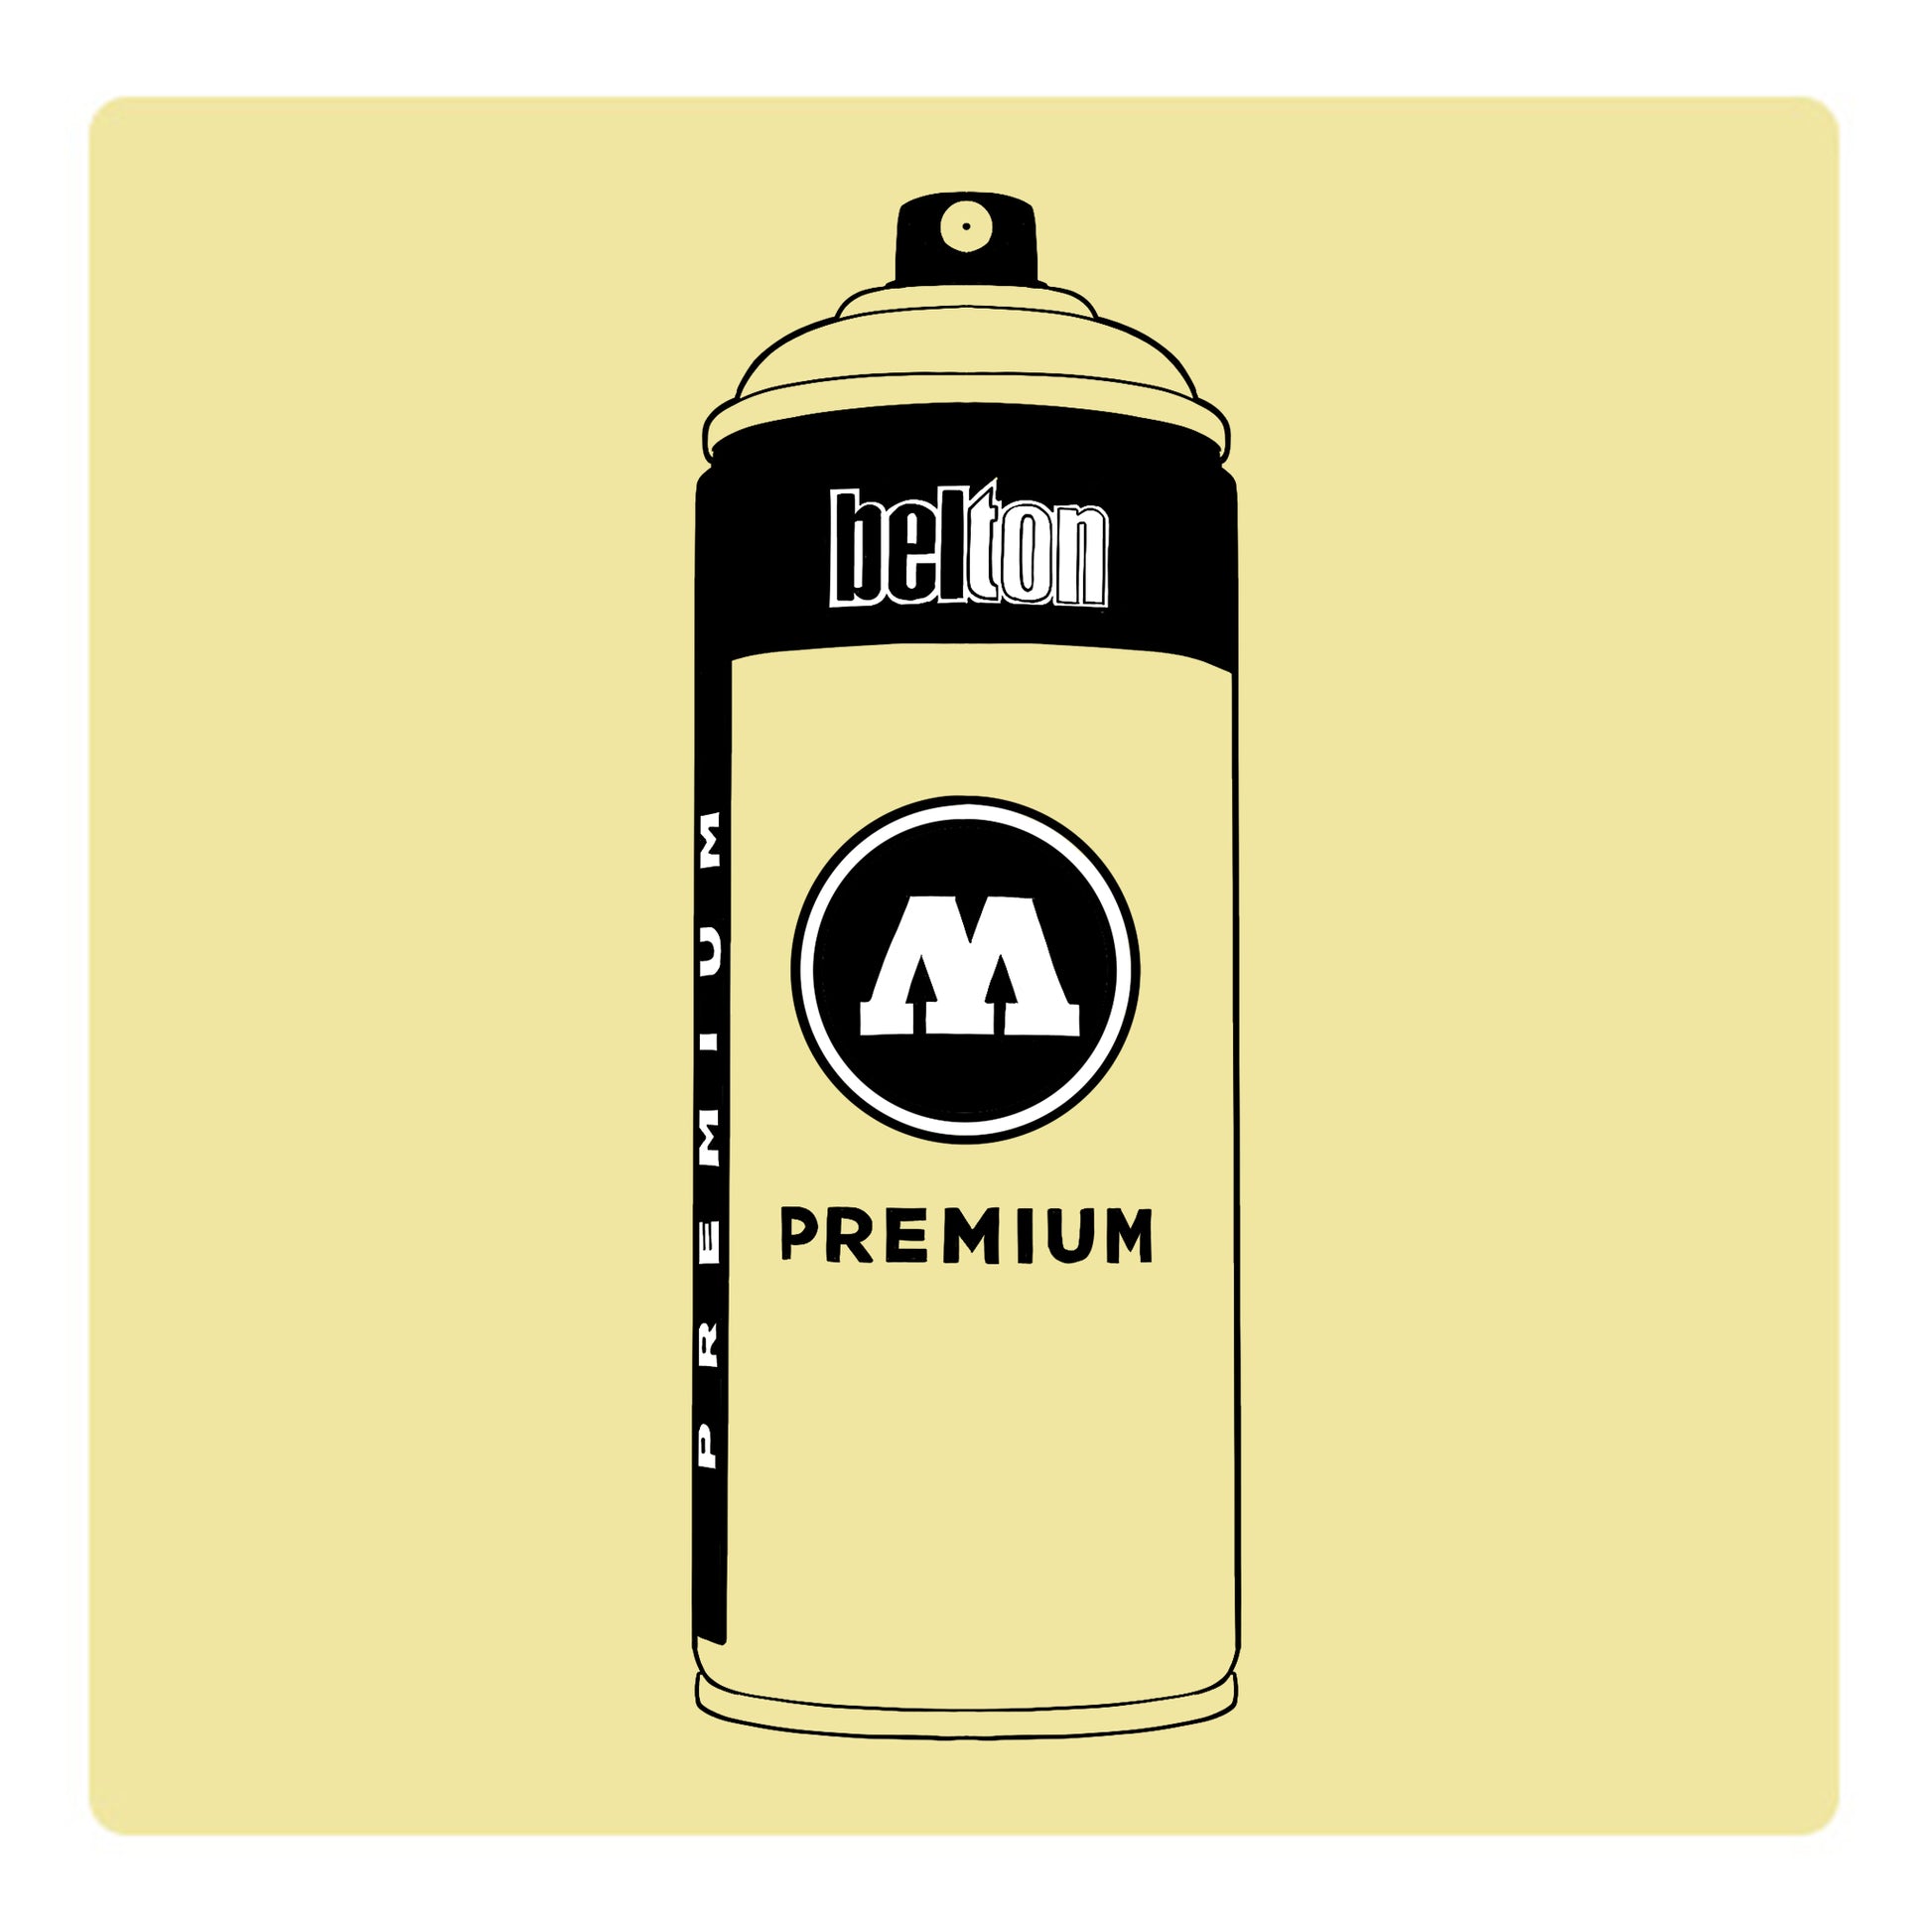 A black outline drawing of a cream yellow spray paint can with the words "belton","premium" and the letter"M" written on the face in black and white font. The background is a color swatch of the same cream yellow color with a white border